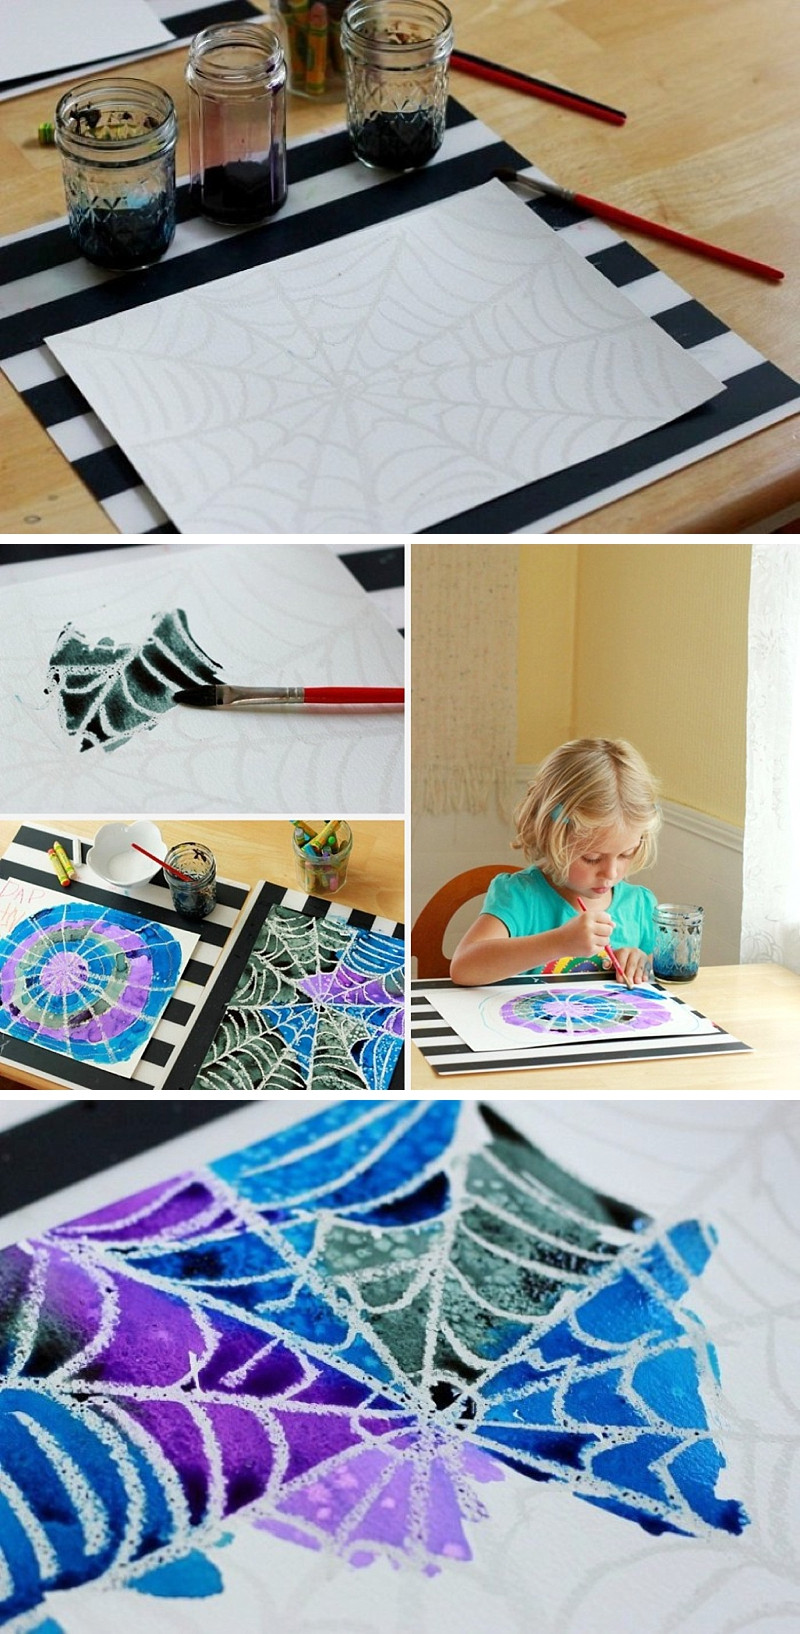 Fun Art Projects For Kids
 Spider Web Art Project A Simple and Beautiful